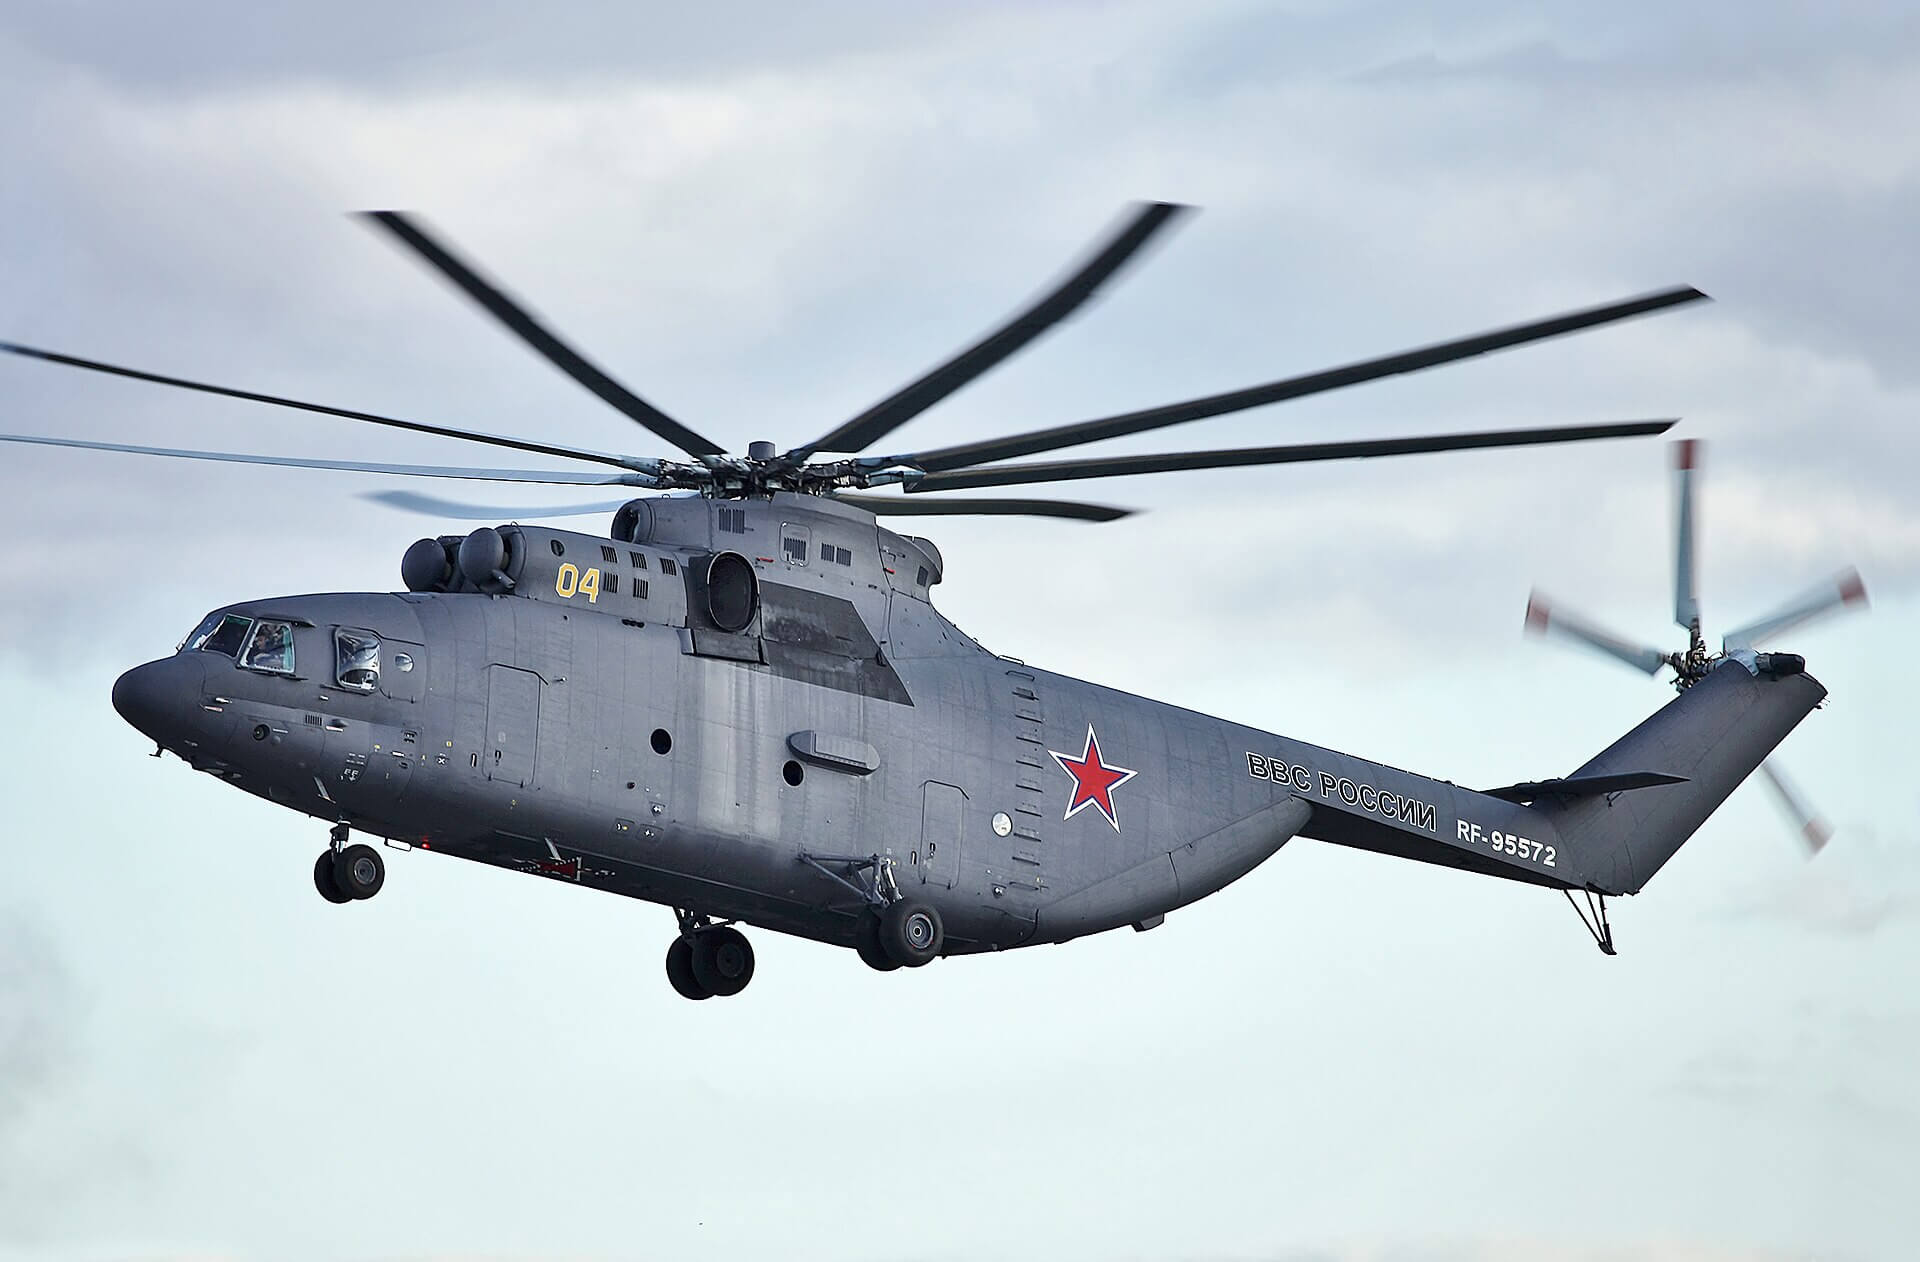 A Russian Air Force Mil Mi-26—the biggest helicopter in the world.